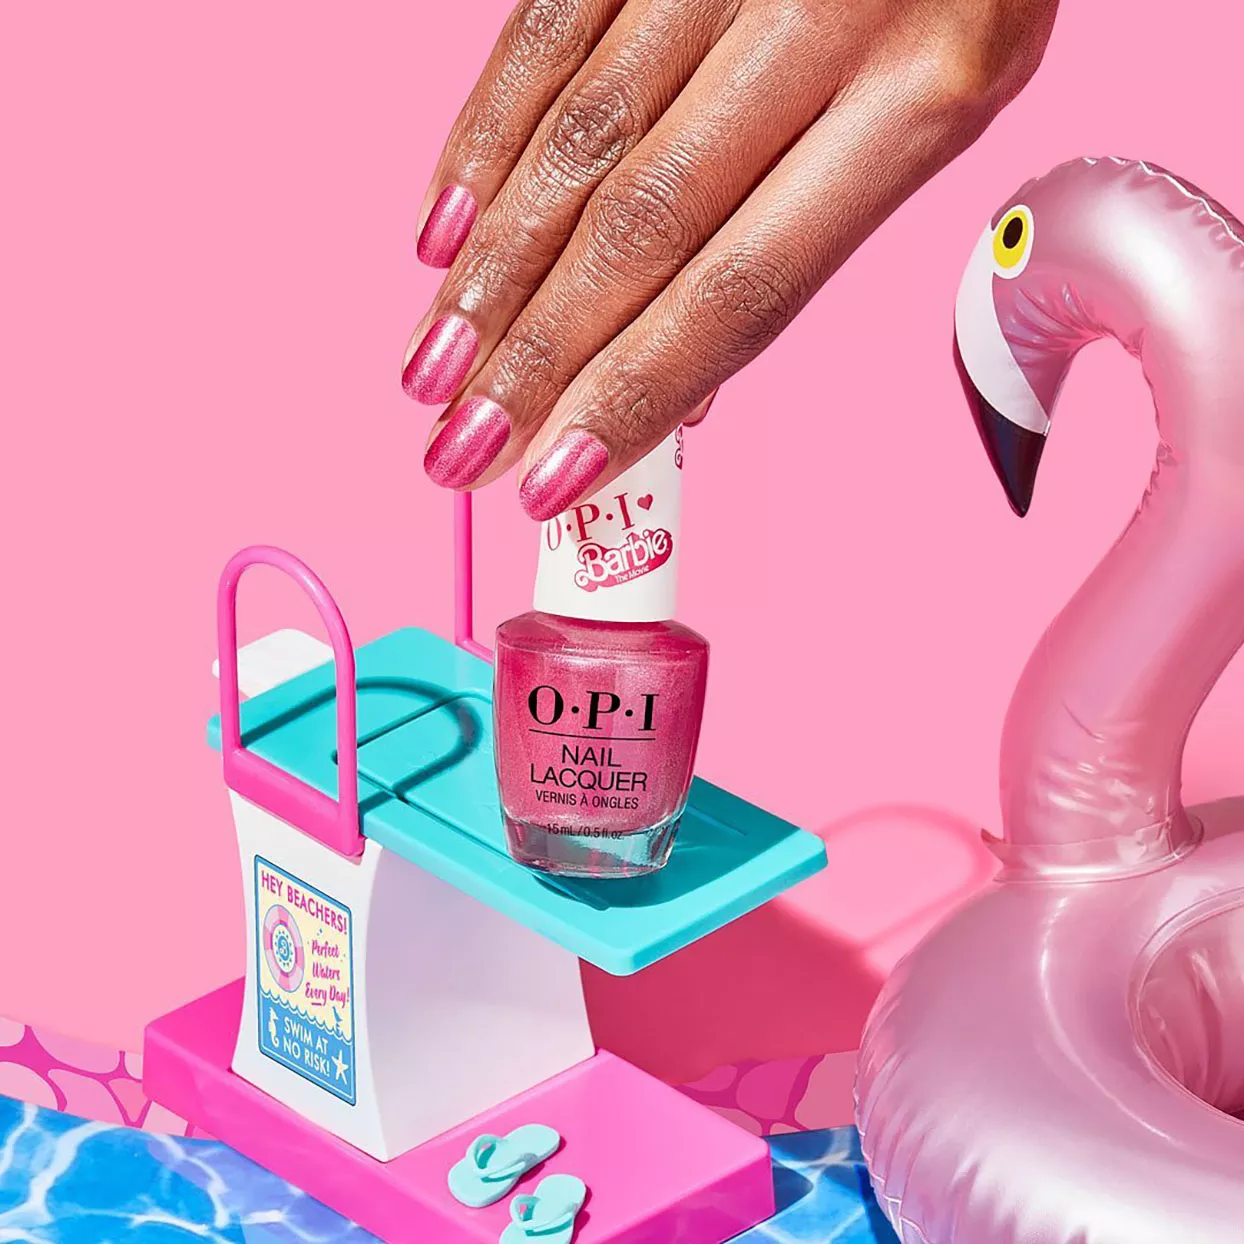 OPI Launched a Limited-Edition Barbie Nail Polish Collection That’s 100% Going to Sell Out